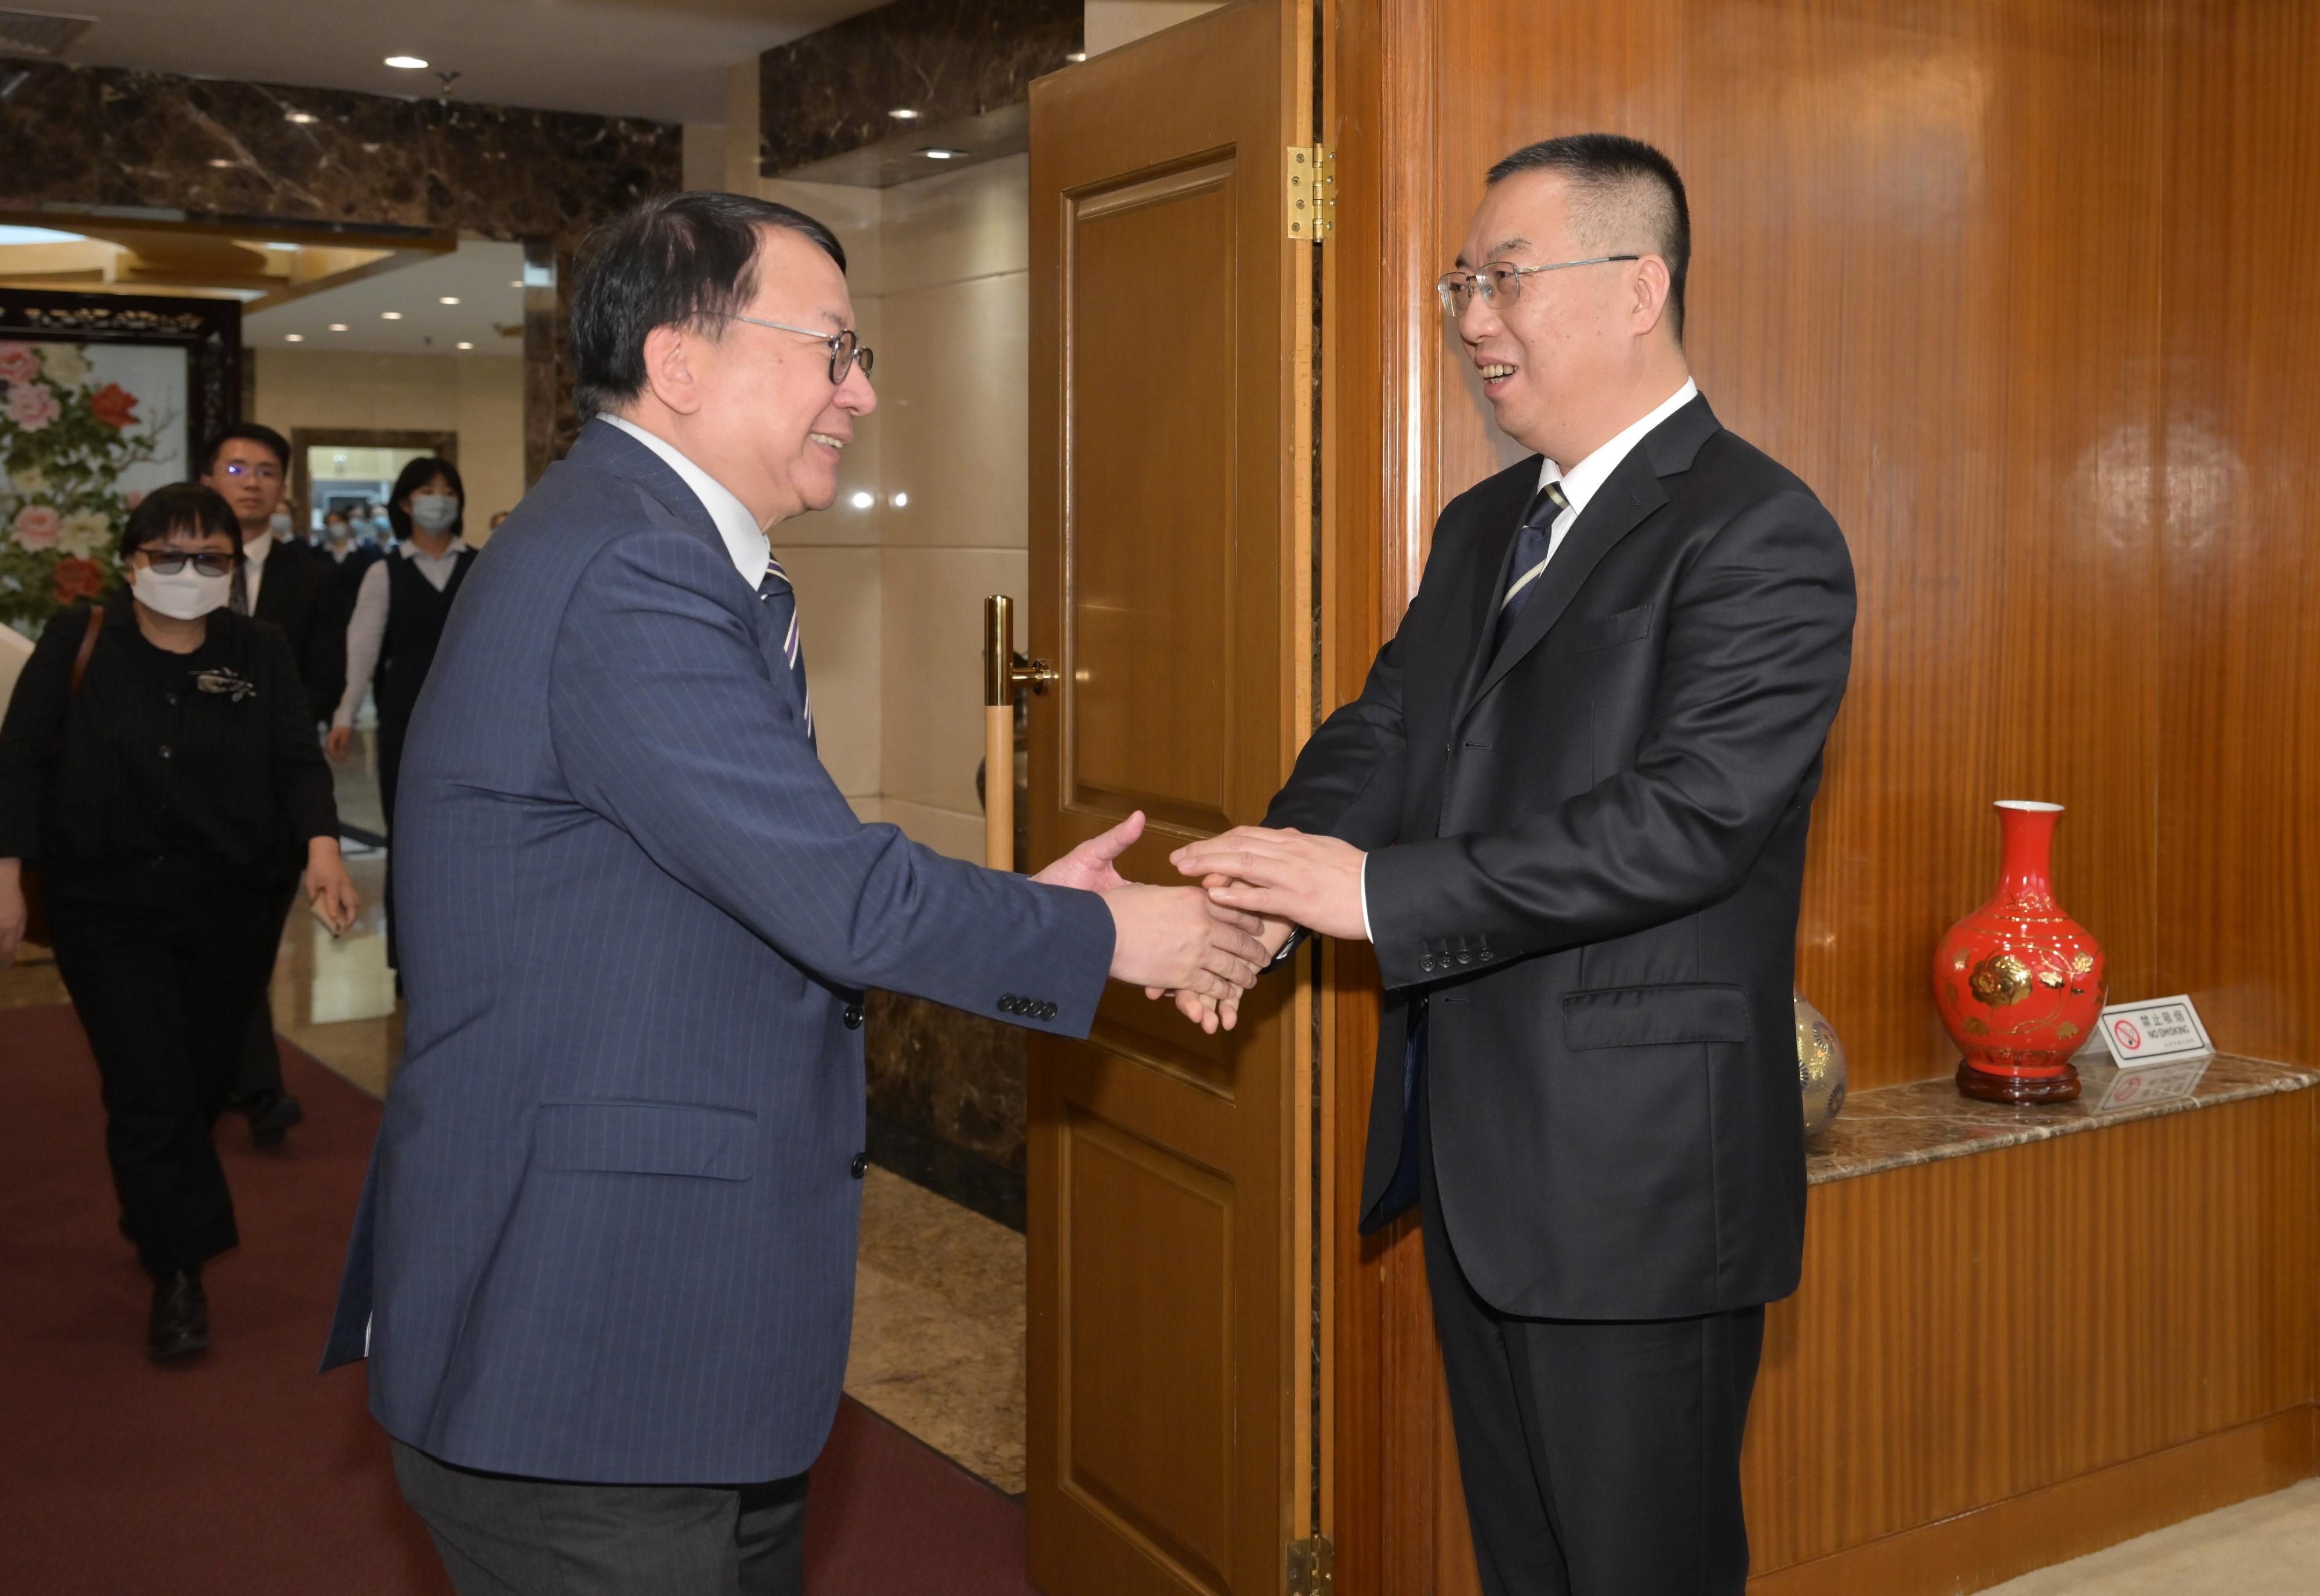 The Chief Secretary for Administration, Mr Chan Kwok-ki (left), meets with Vice Chairman of the National Development and Reform Commission Mr Li Chunlin (right) in Beijing today (April 28).